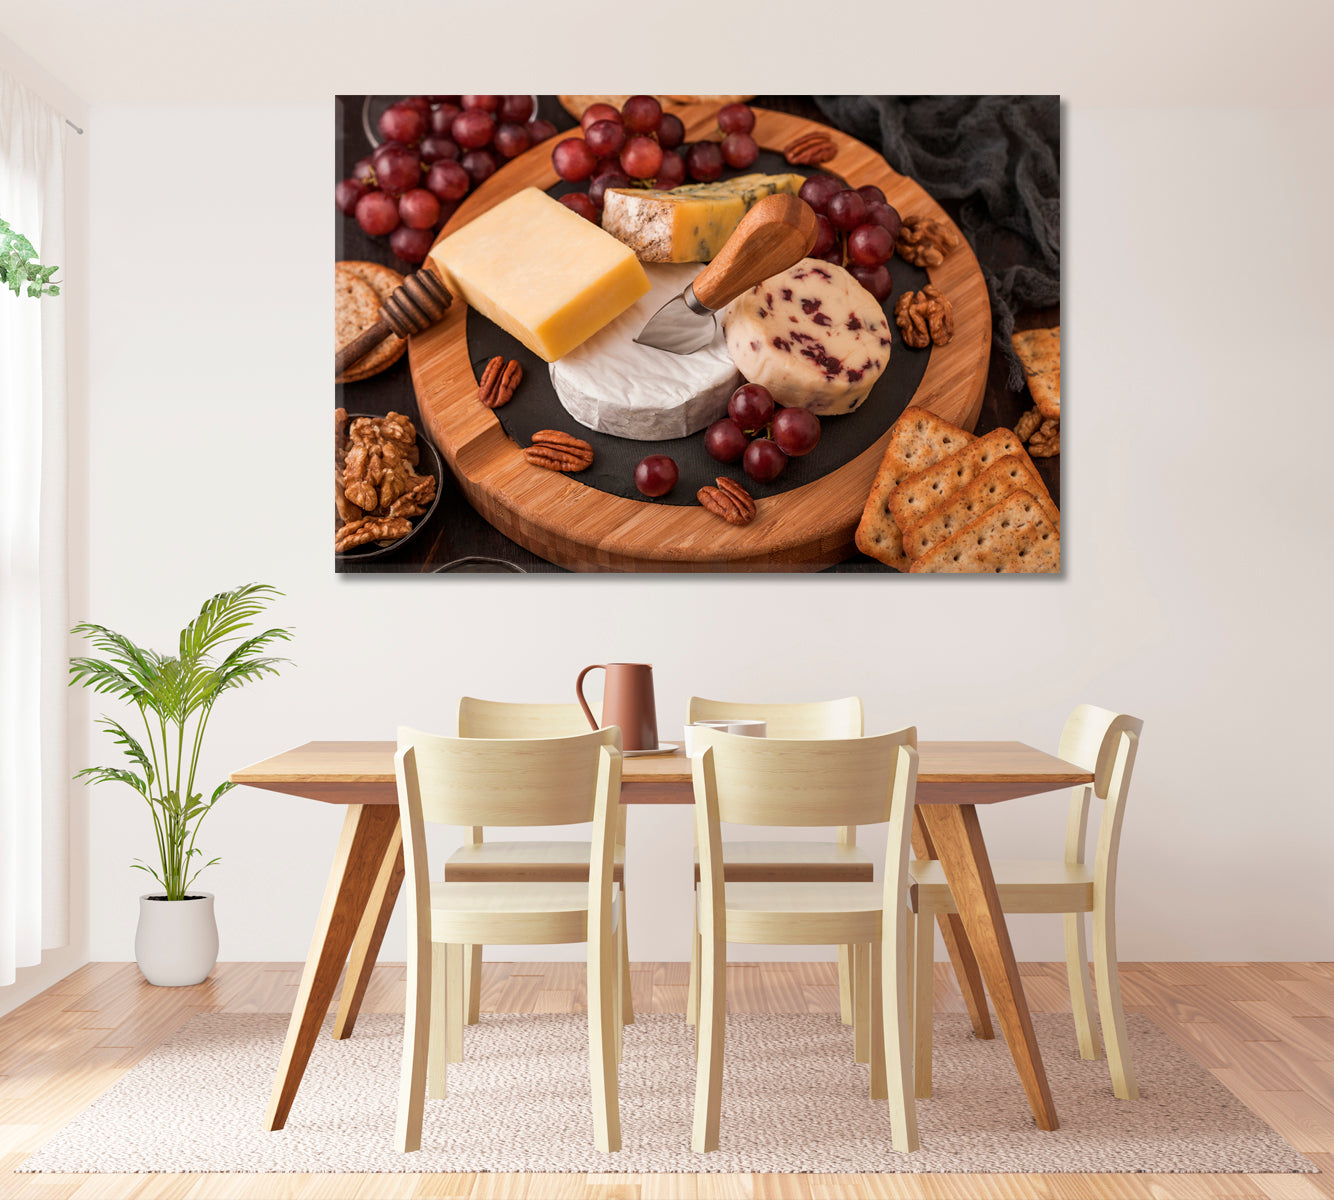 Various Cheese on Wooden Board Canvas Print ArtLexy 1 Panel 24"x16" inches 